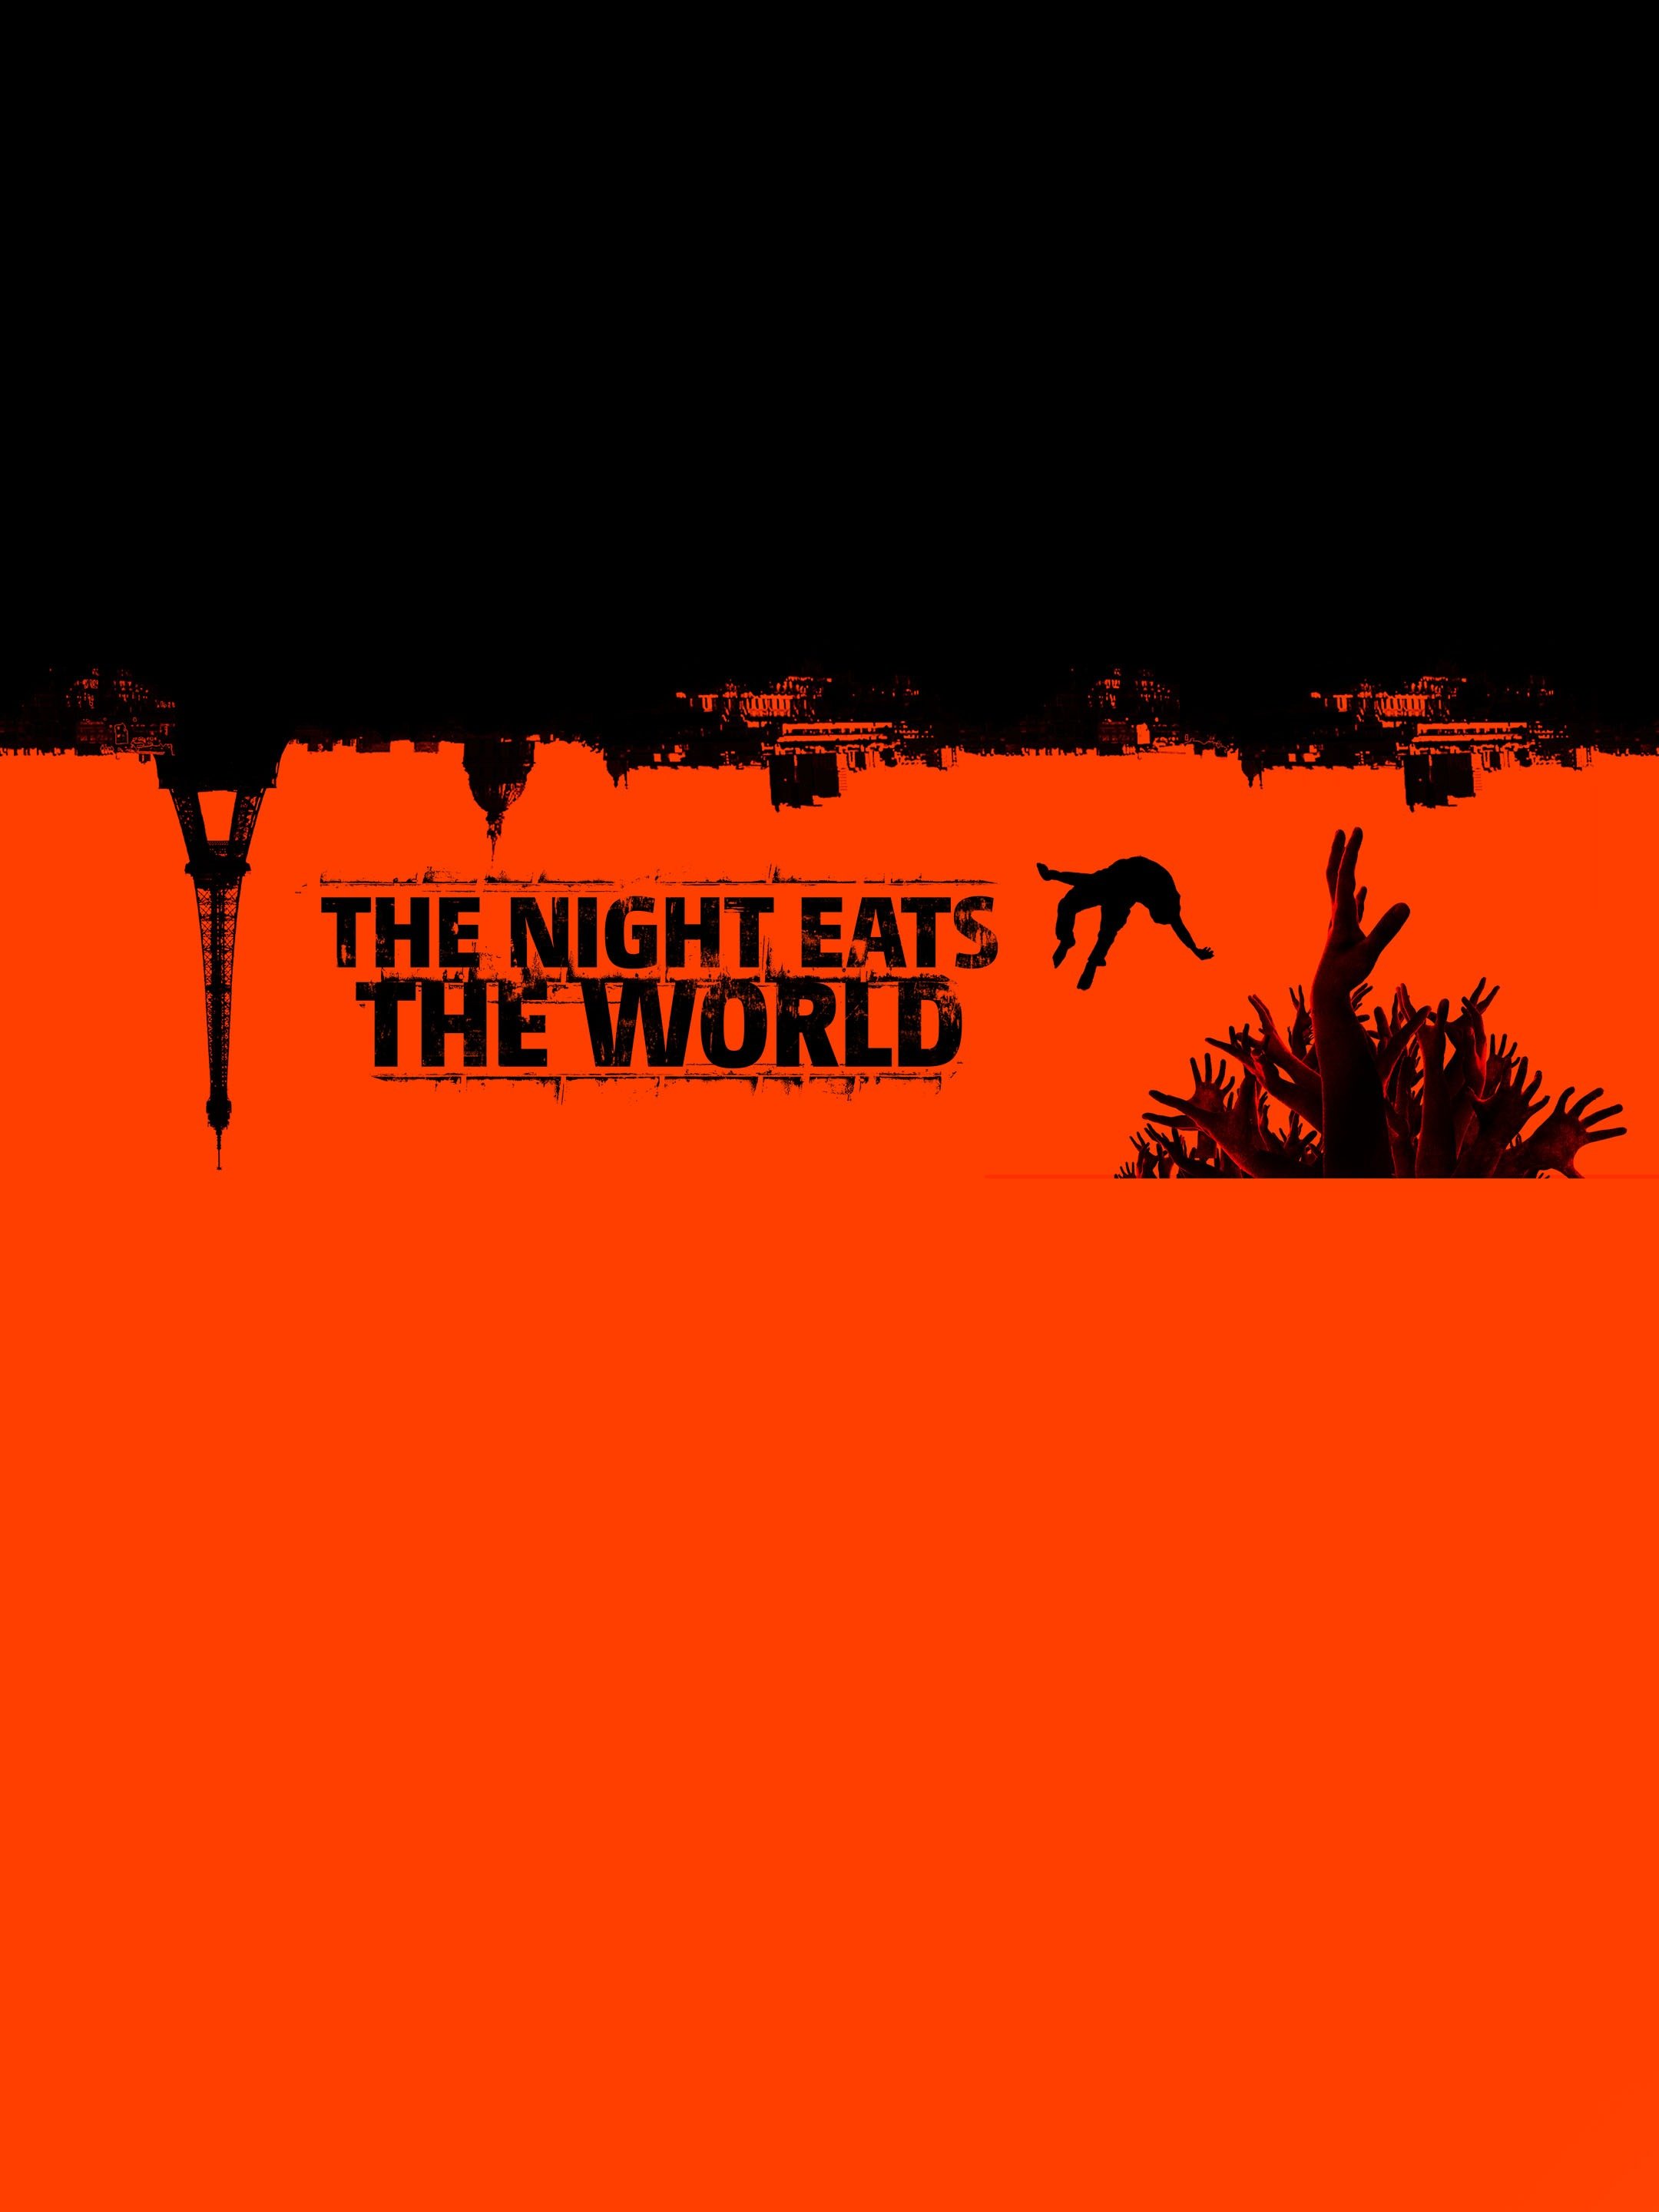 The Night Eats the World: Trailer 1 - Trailers & Videos - Rotten Tomatoes